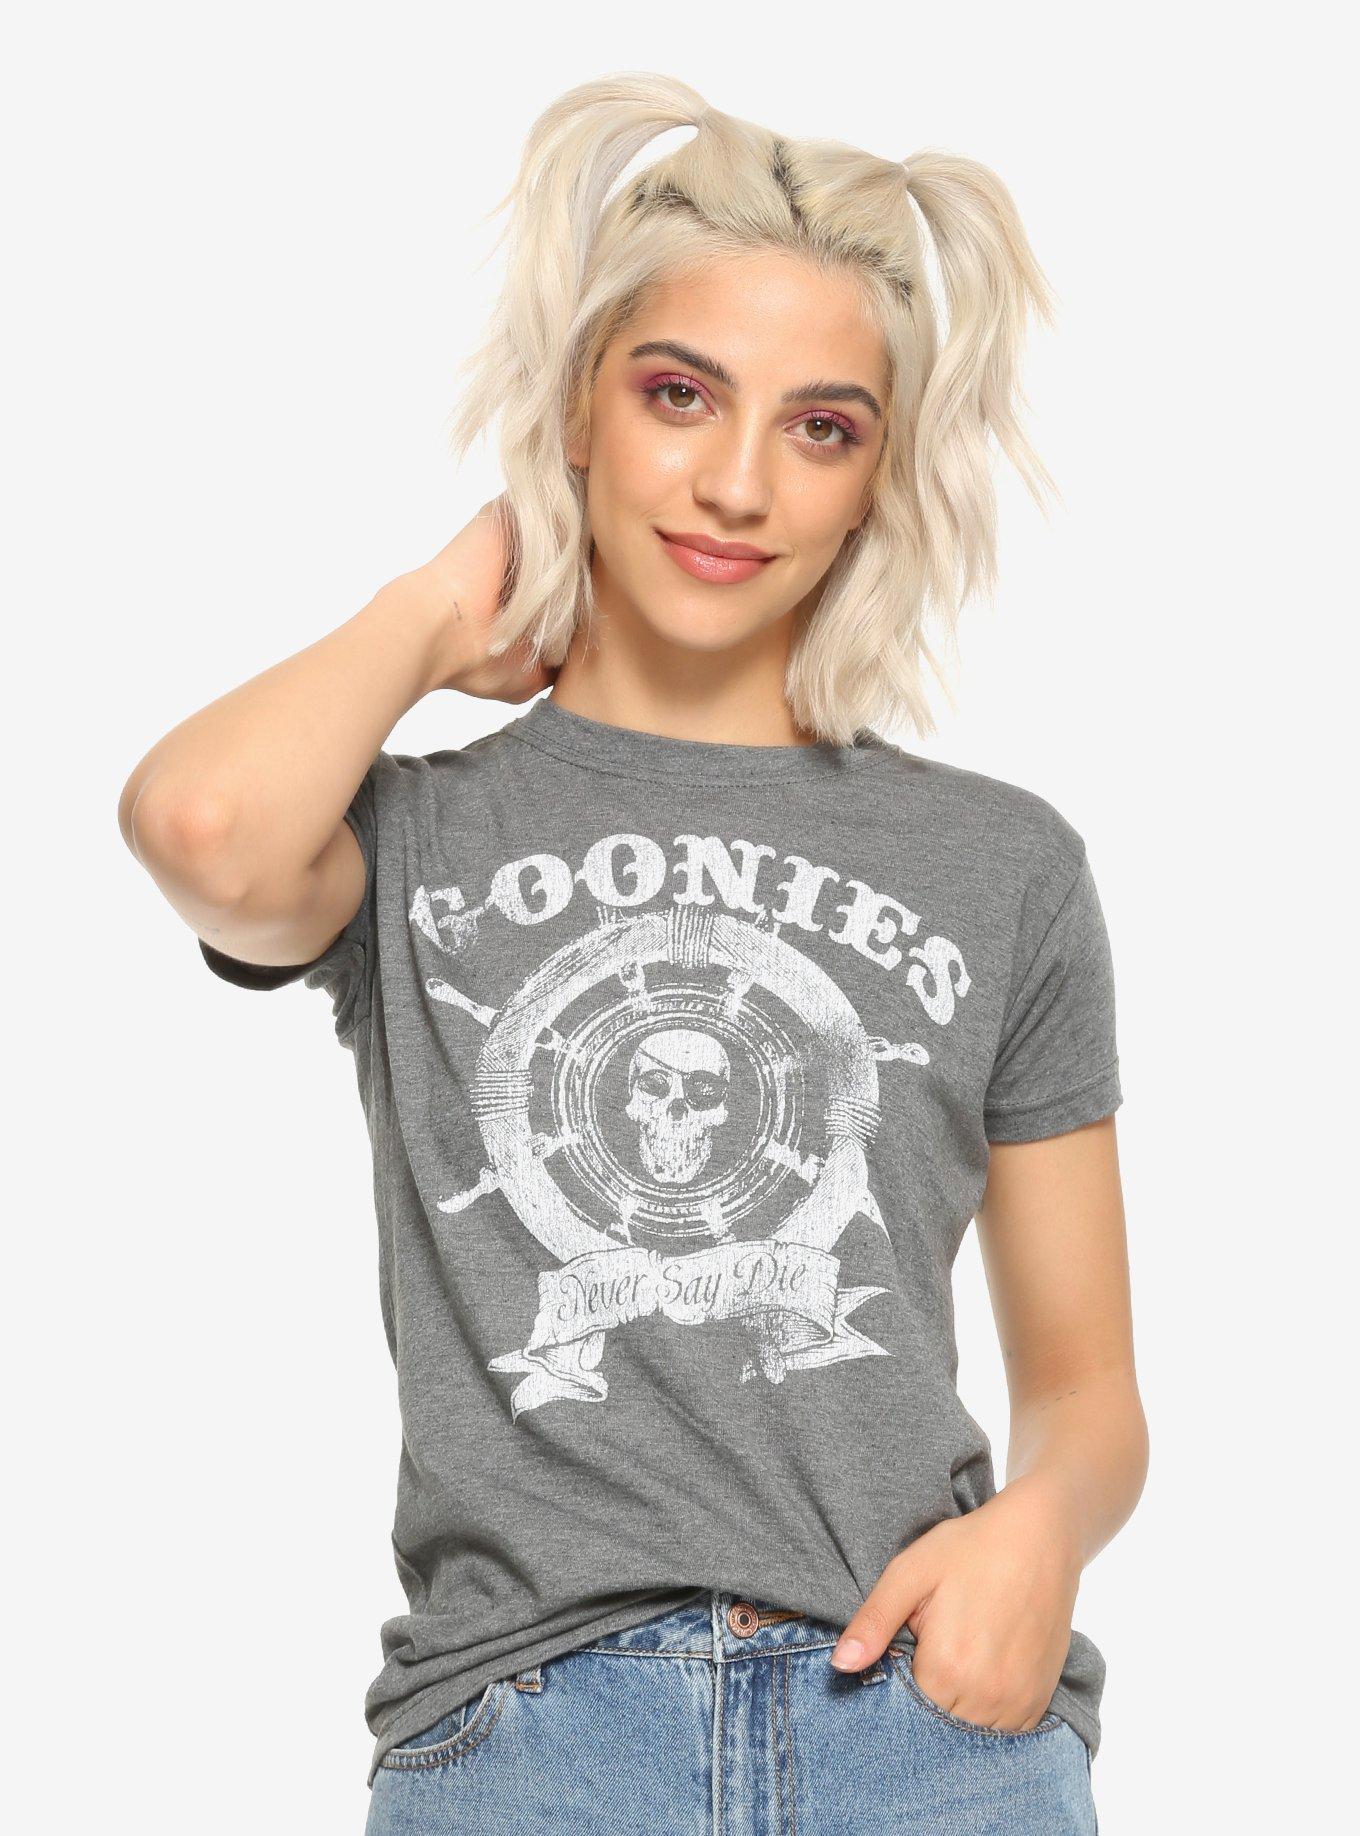 The Goonies Never Say Die Girls T-Shirt, WHITE, hi-res